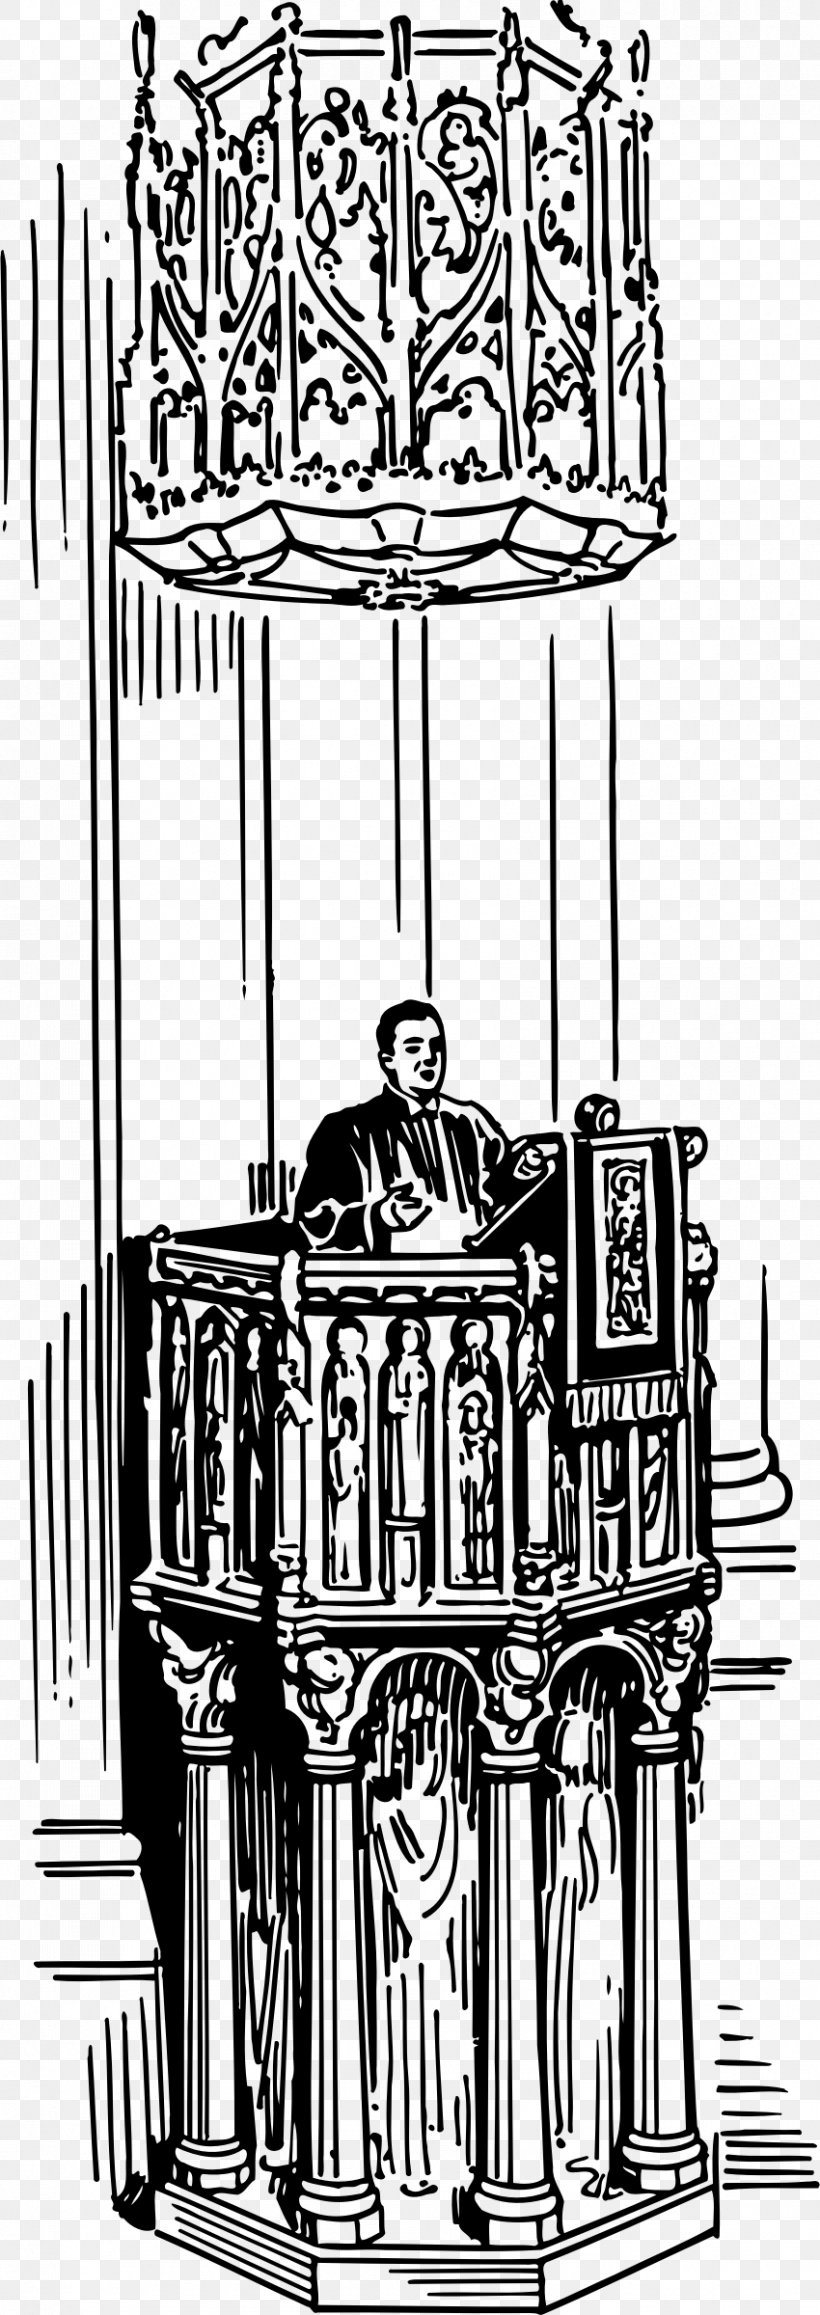 Pulpit Preacher Church Clergy Clip Art, PNG, 850x2400px, Pulpit, Arch, Black And White, Christian Church, Christianity Download Free